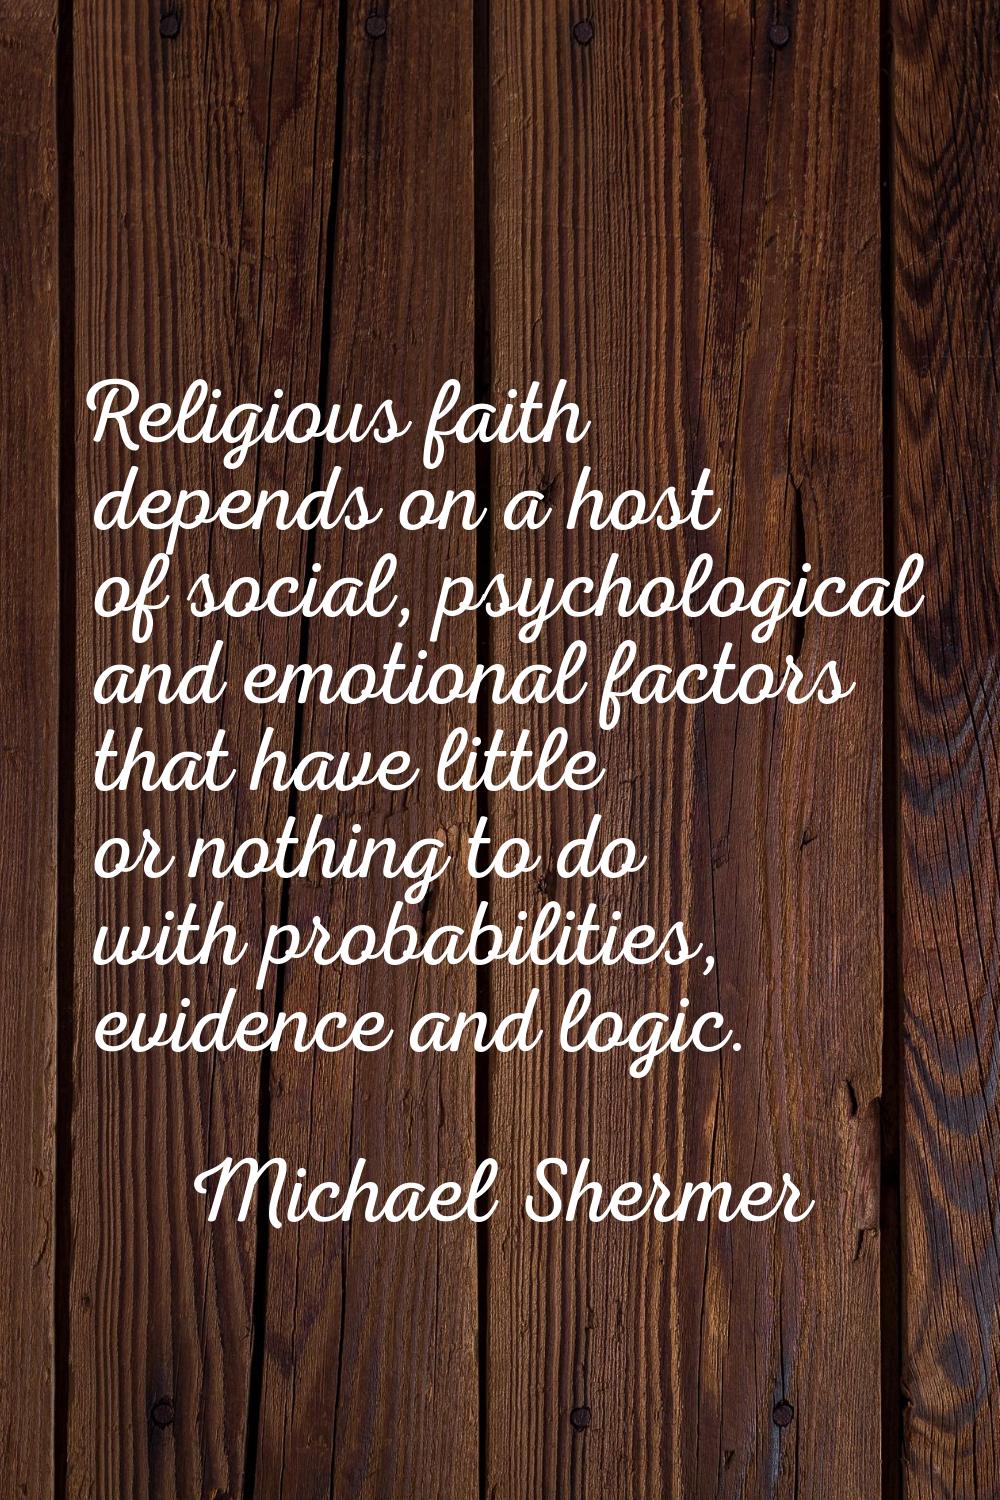 Religious faith depends on a host of social, psychological and emotional factors that have little o